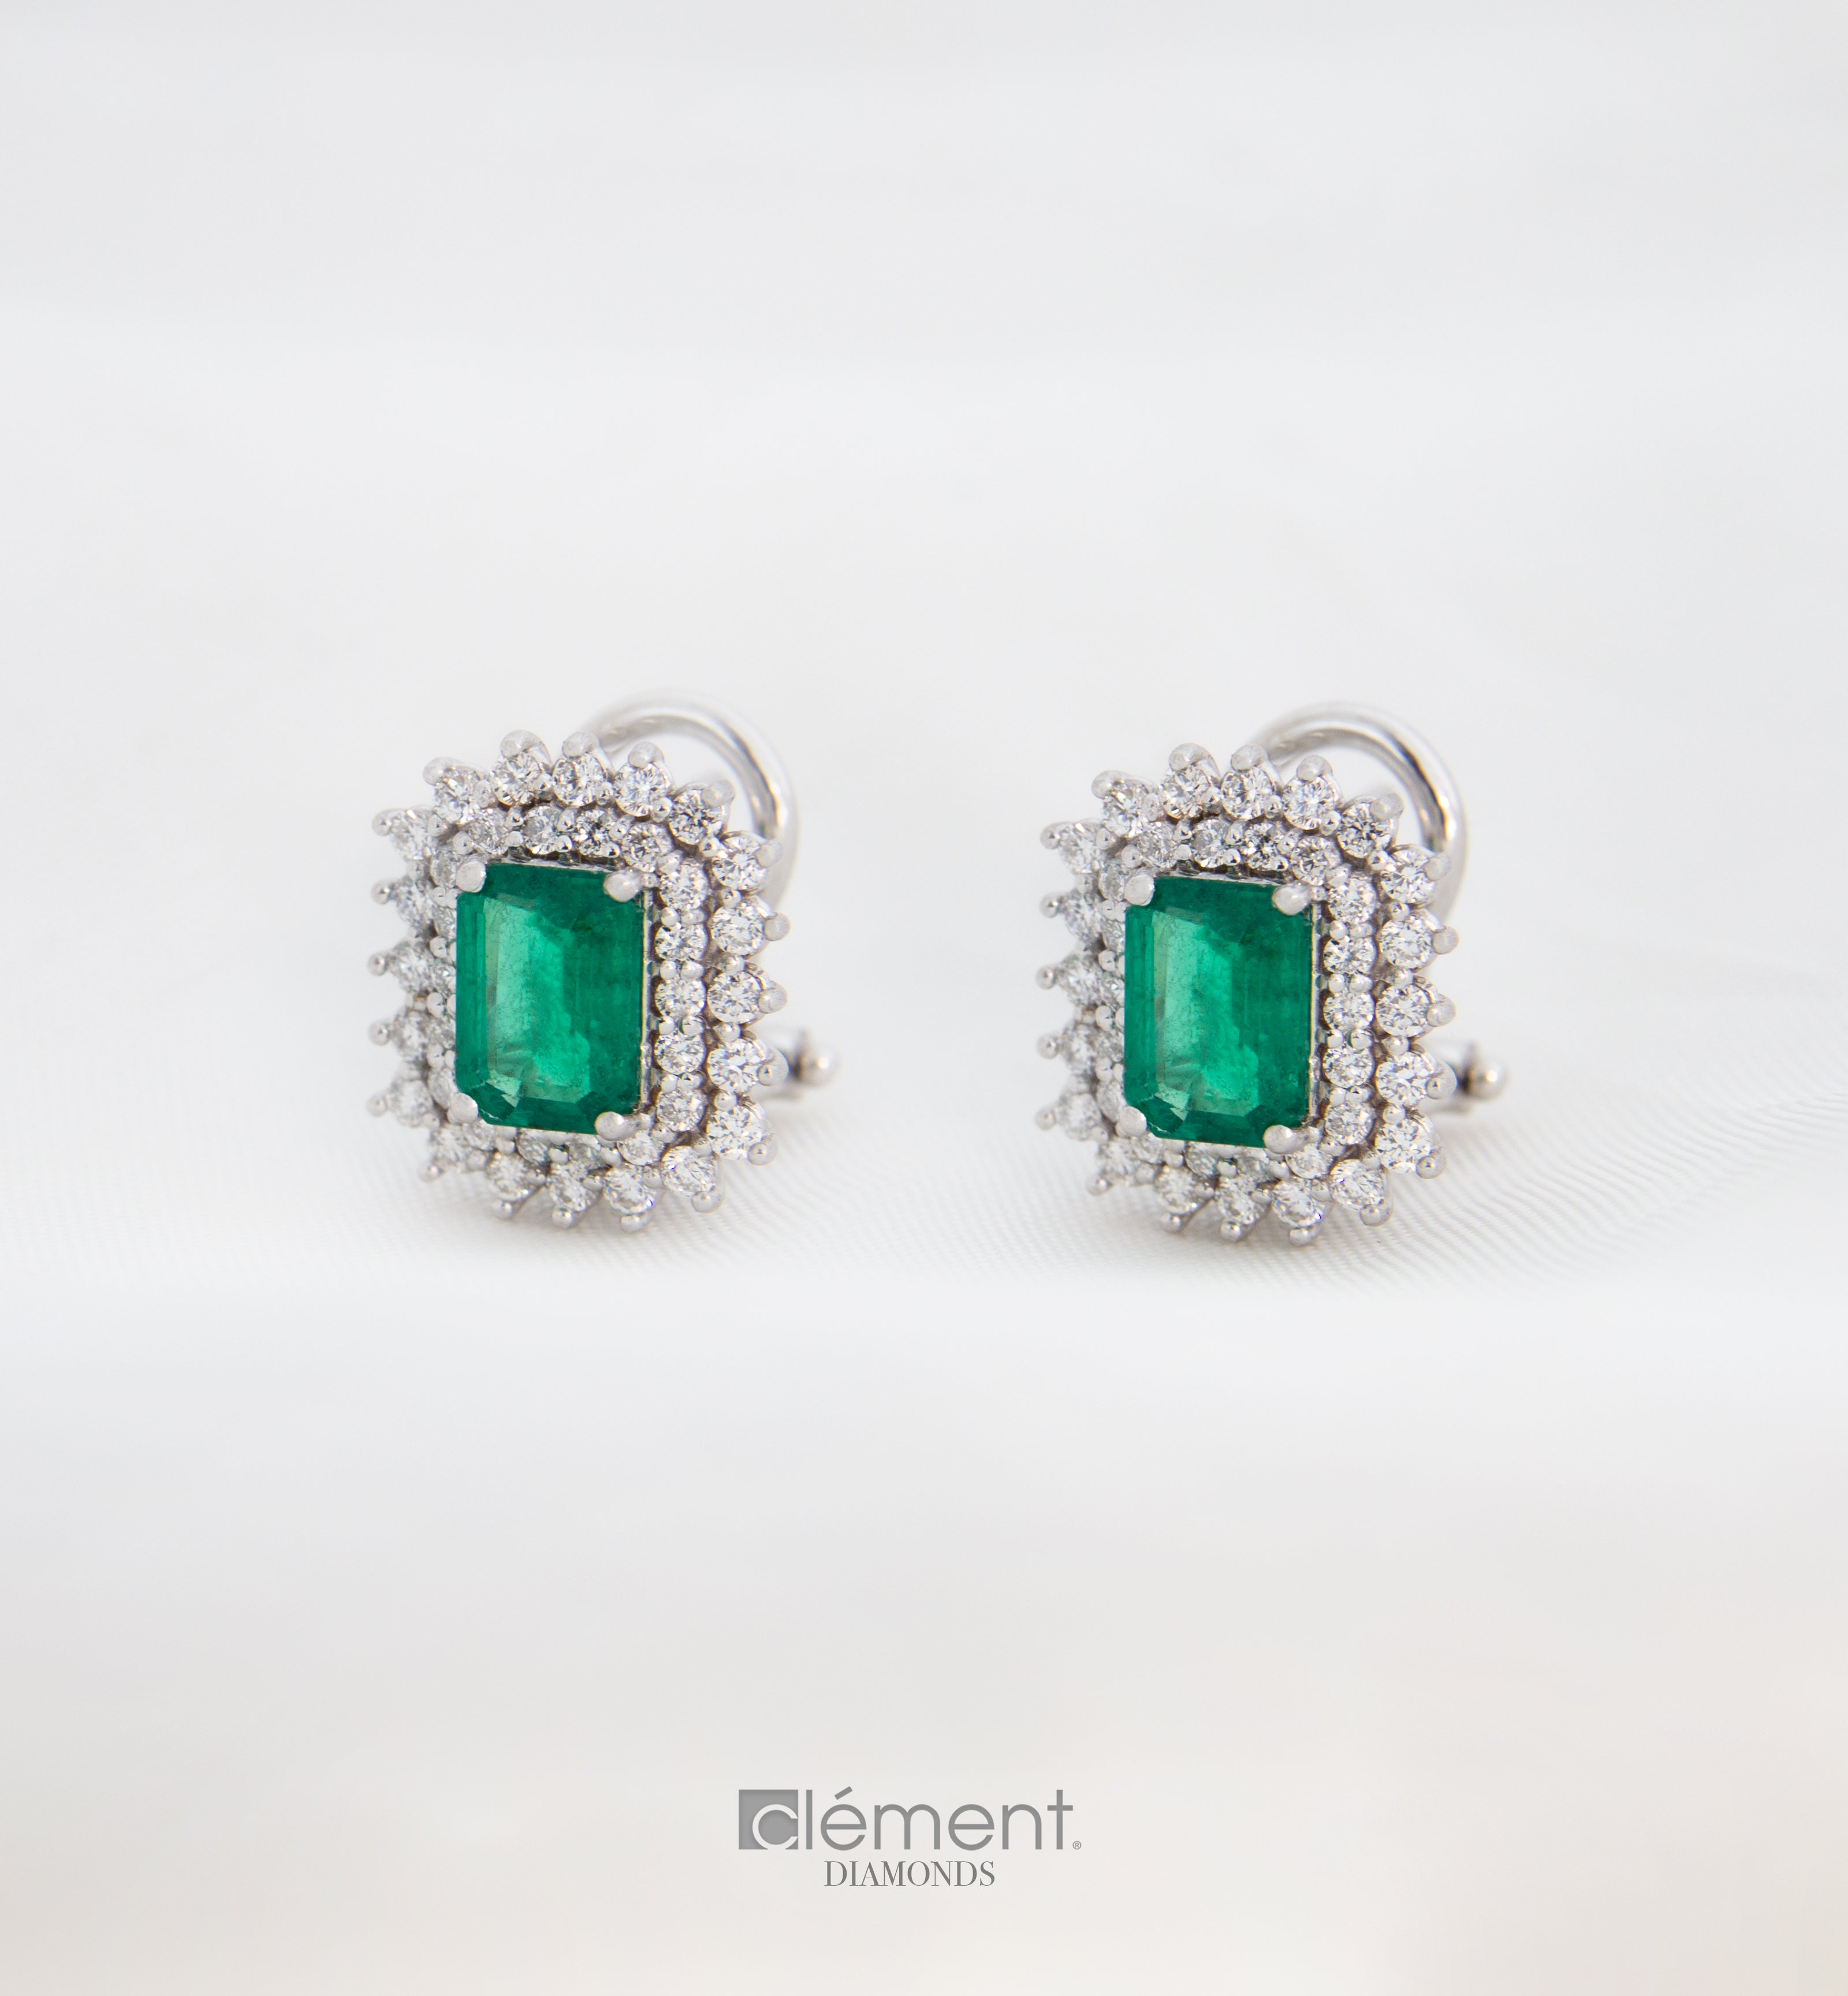 18ct White Gold Diamond and Emerald Earrings